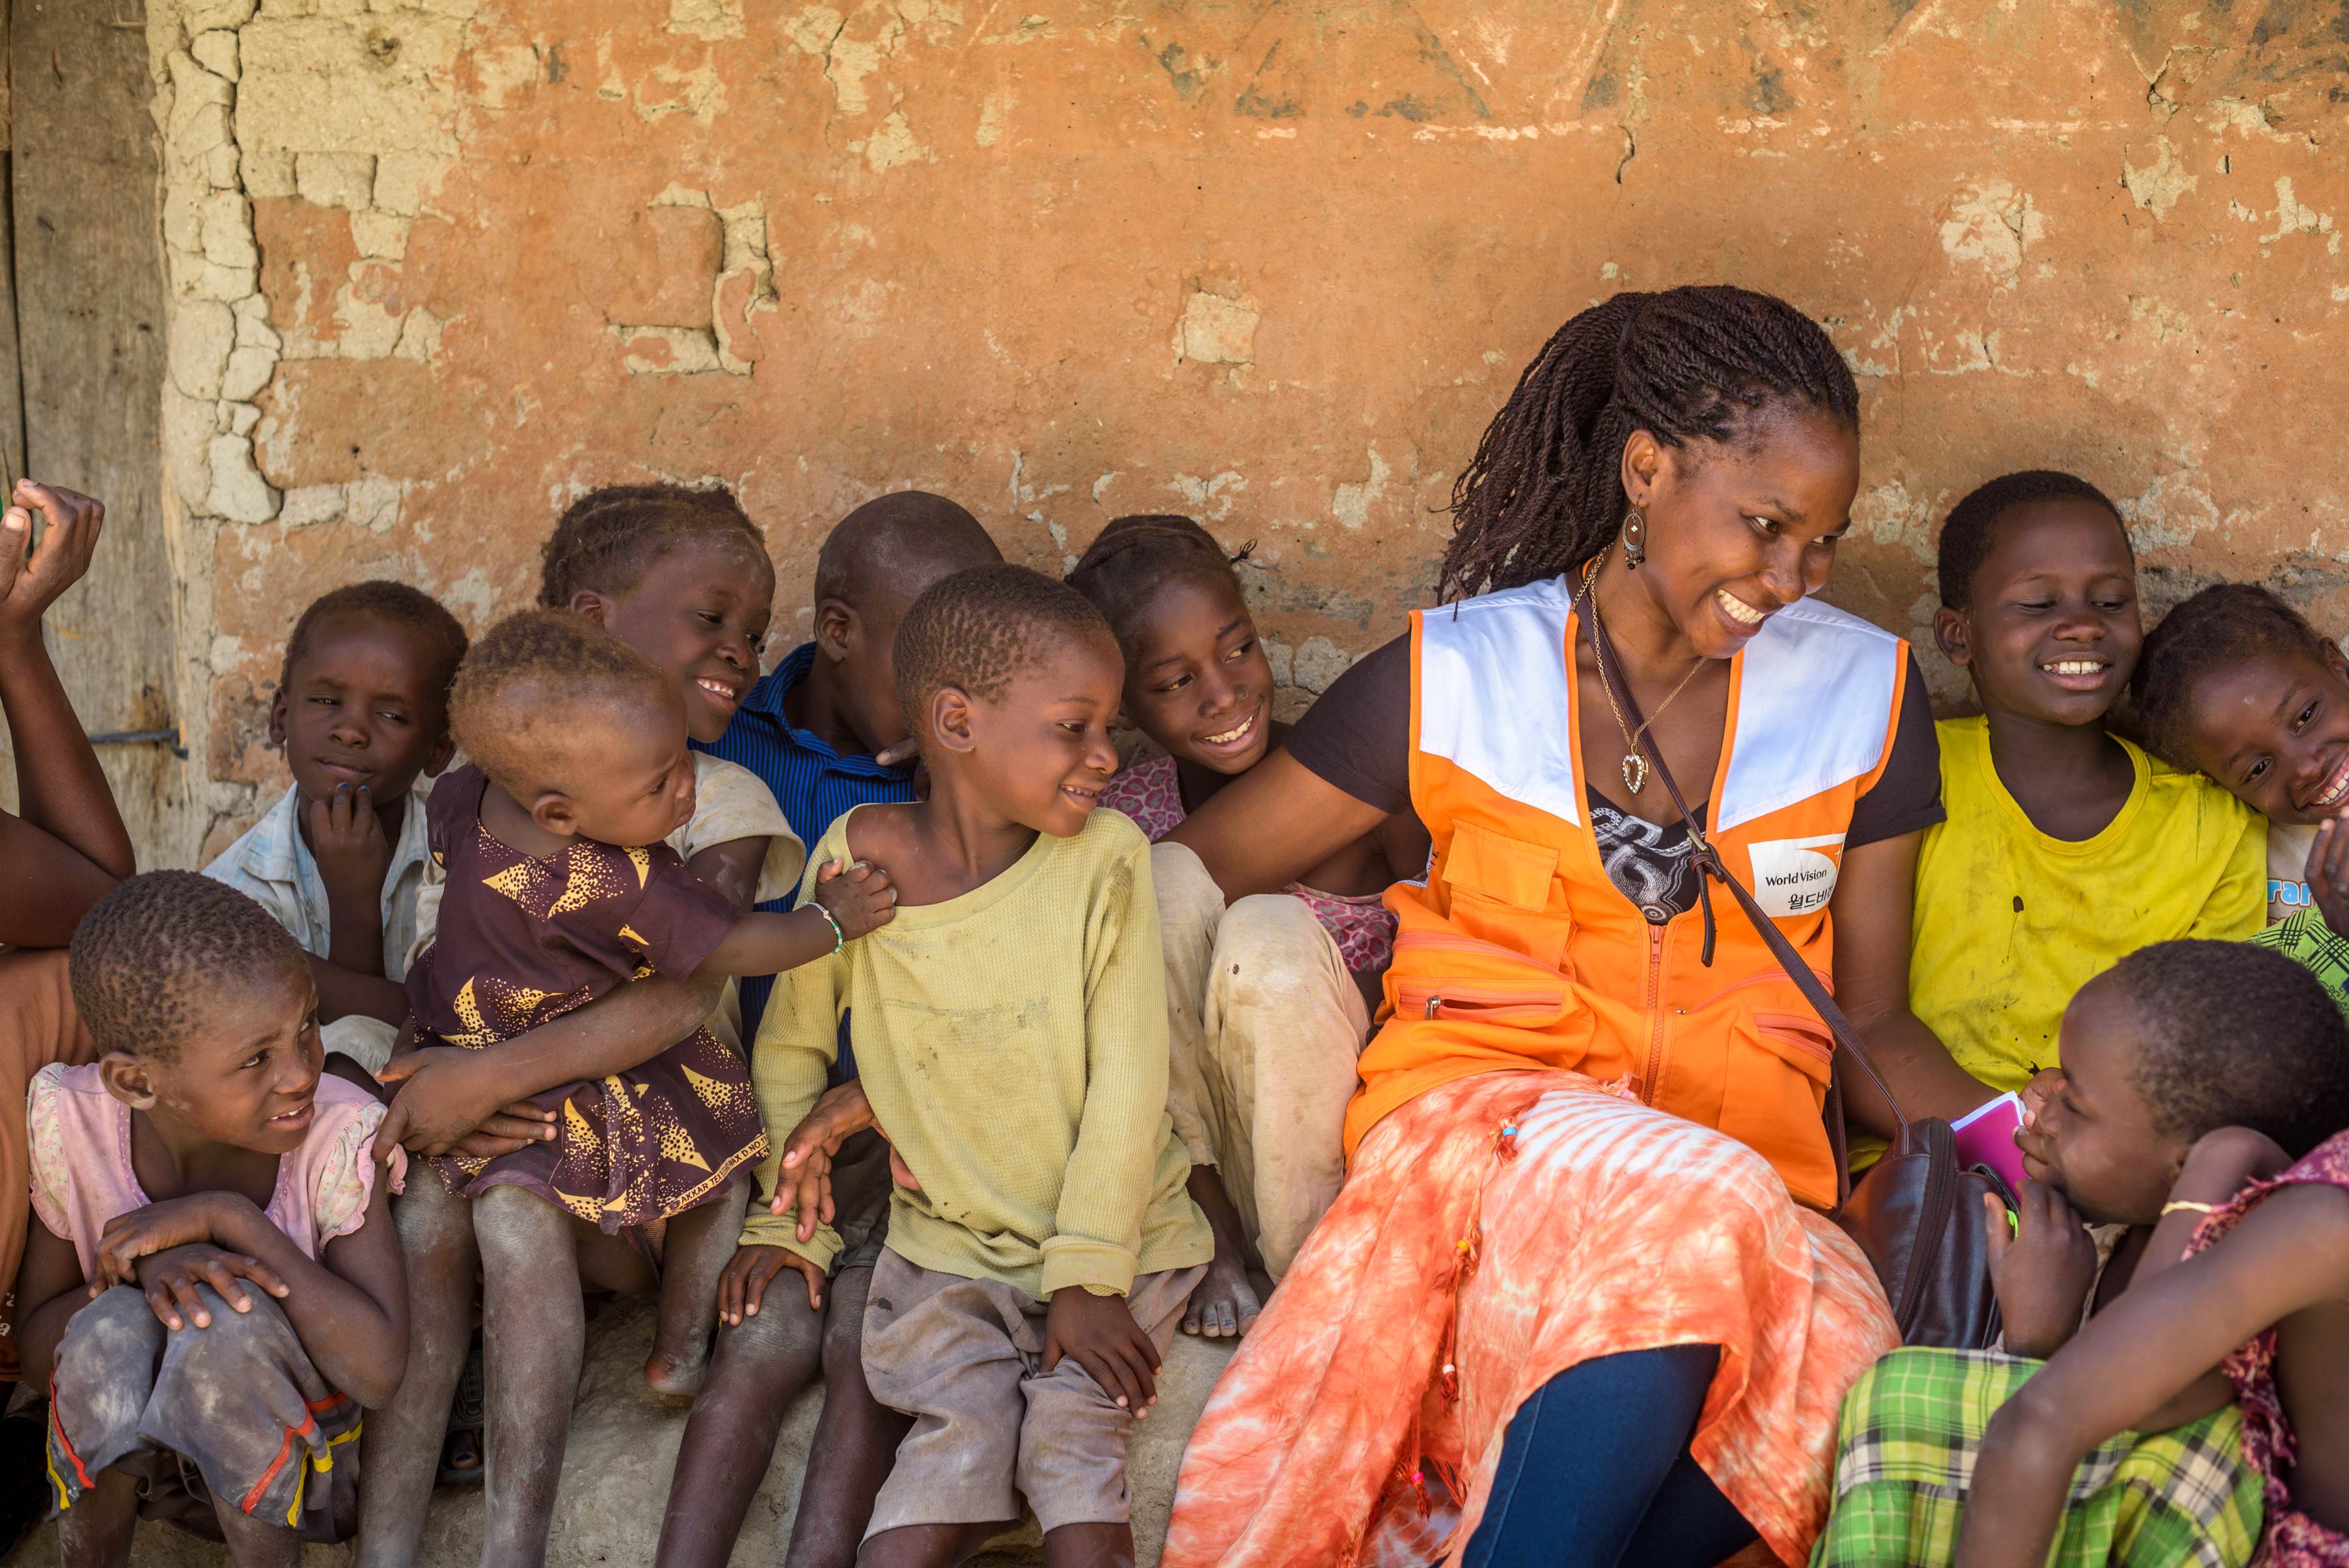 A group of children from Zambia sit on the floor against a wall with a World Vision staff member wearing an orange and white tabard.